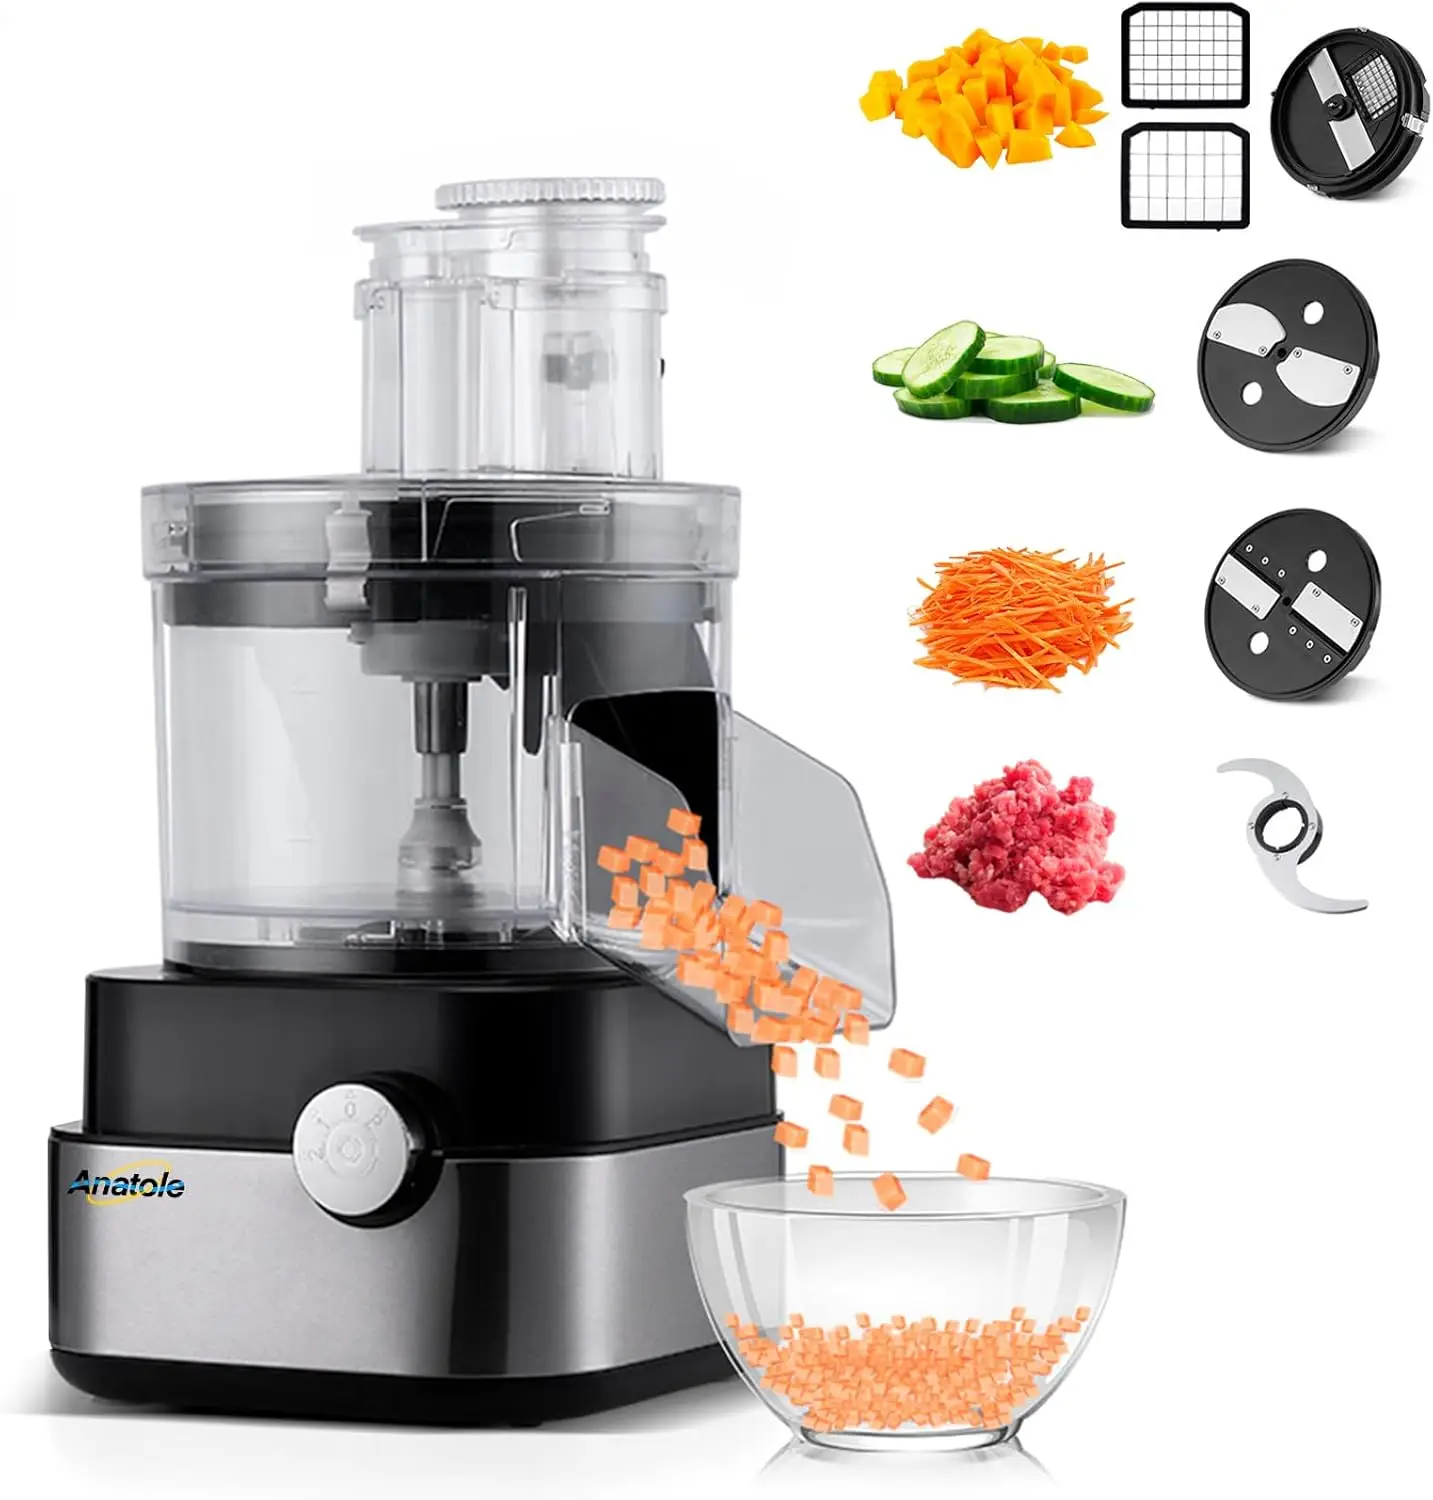 

Anatole Commercial Food Processor 20-Cup Electric Vegetable Dicer Chopper 600W 5 in 1 Professional Veggie Shredder Grater